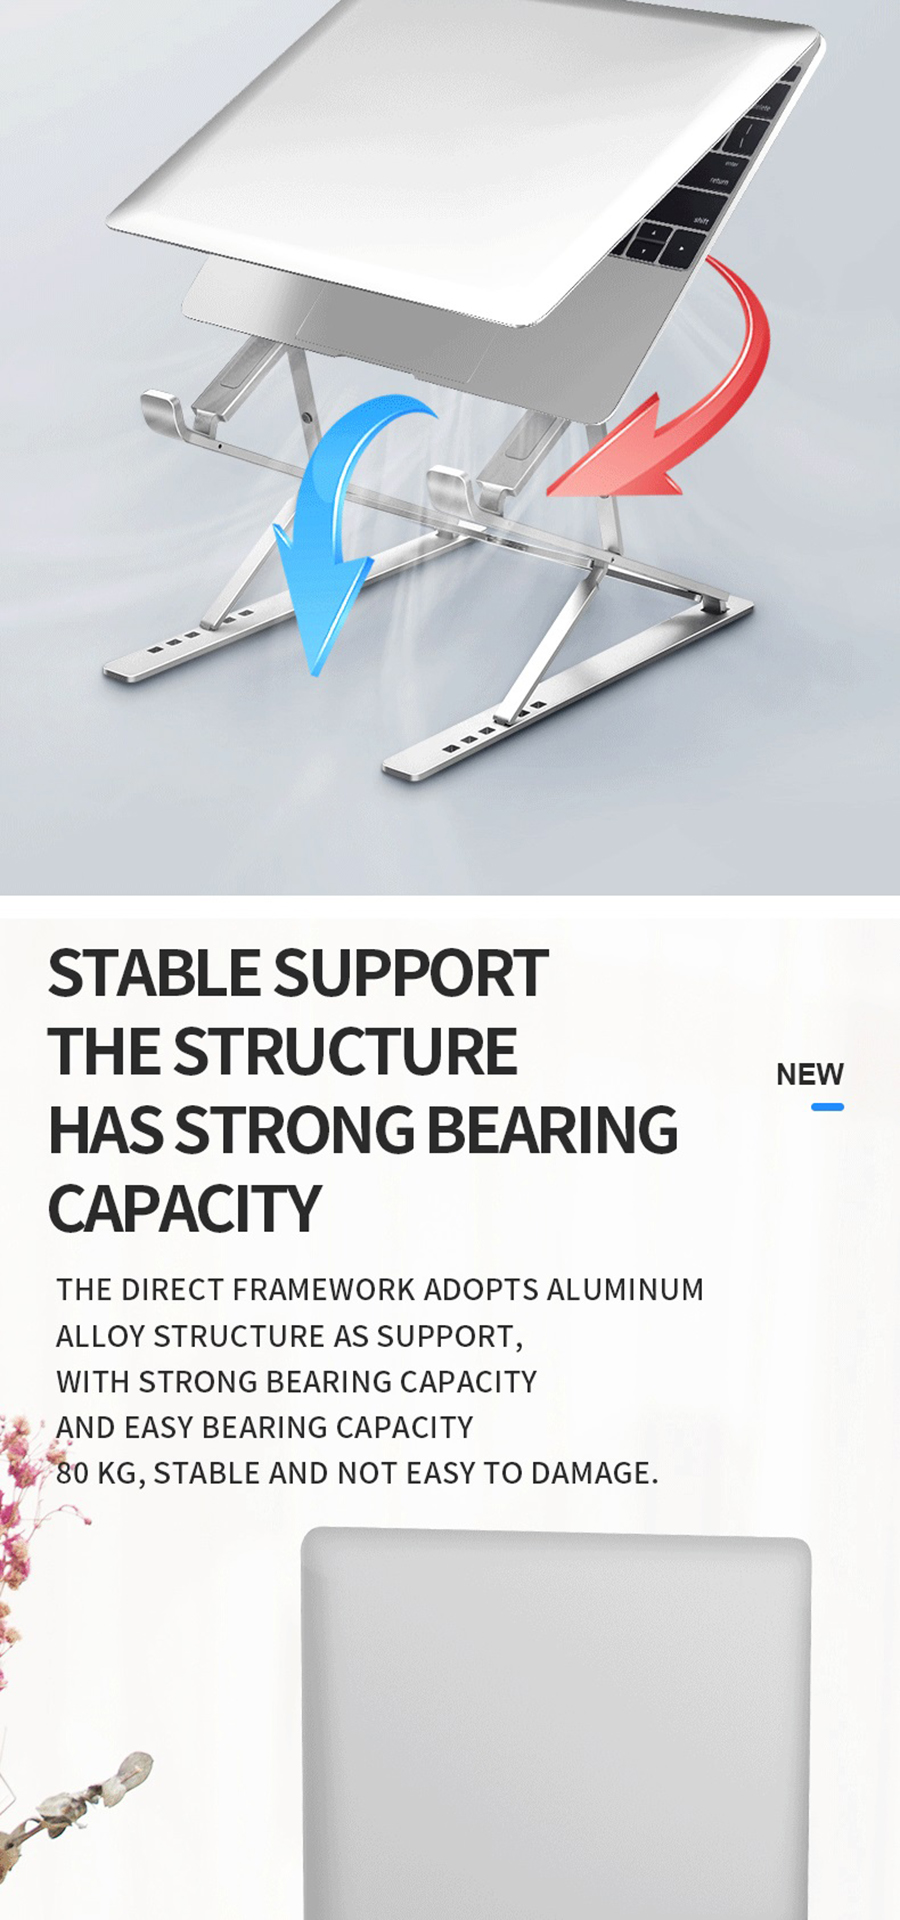 Bakeey-Foldable-Double-Layer-Multiple-Gear-Height-Adjustment-Aluminium-Alloy-Macbook-Stand-Bracket-H-1921306-7